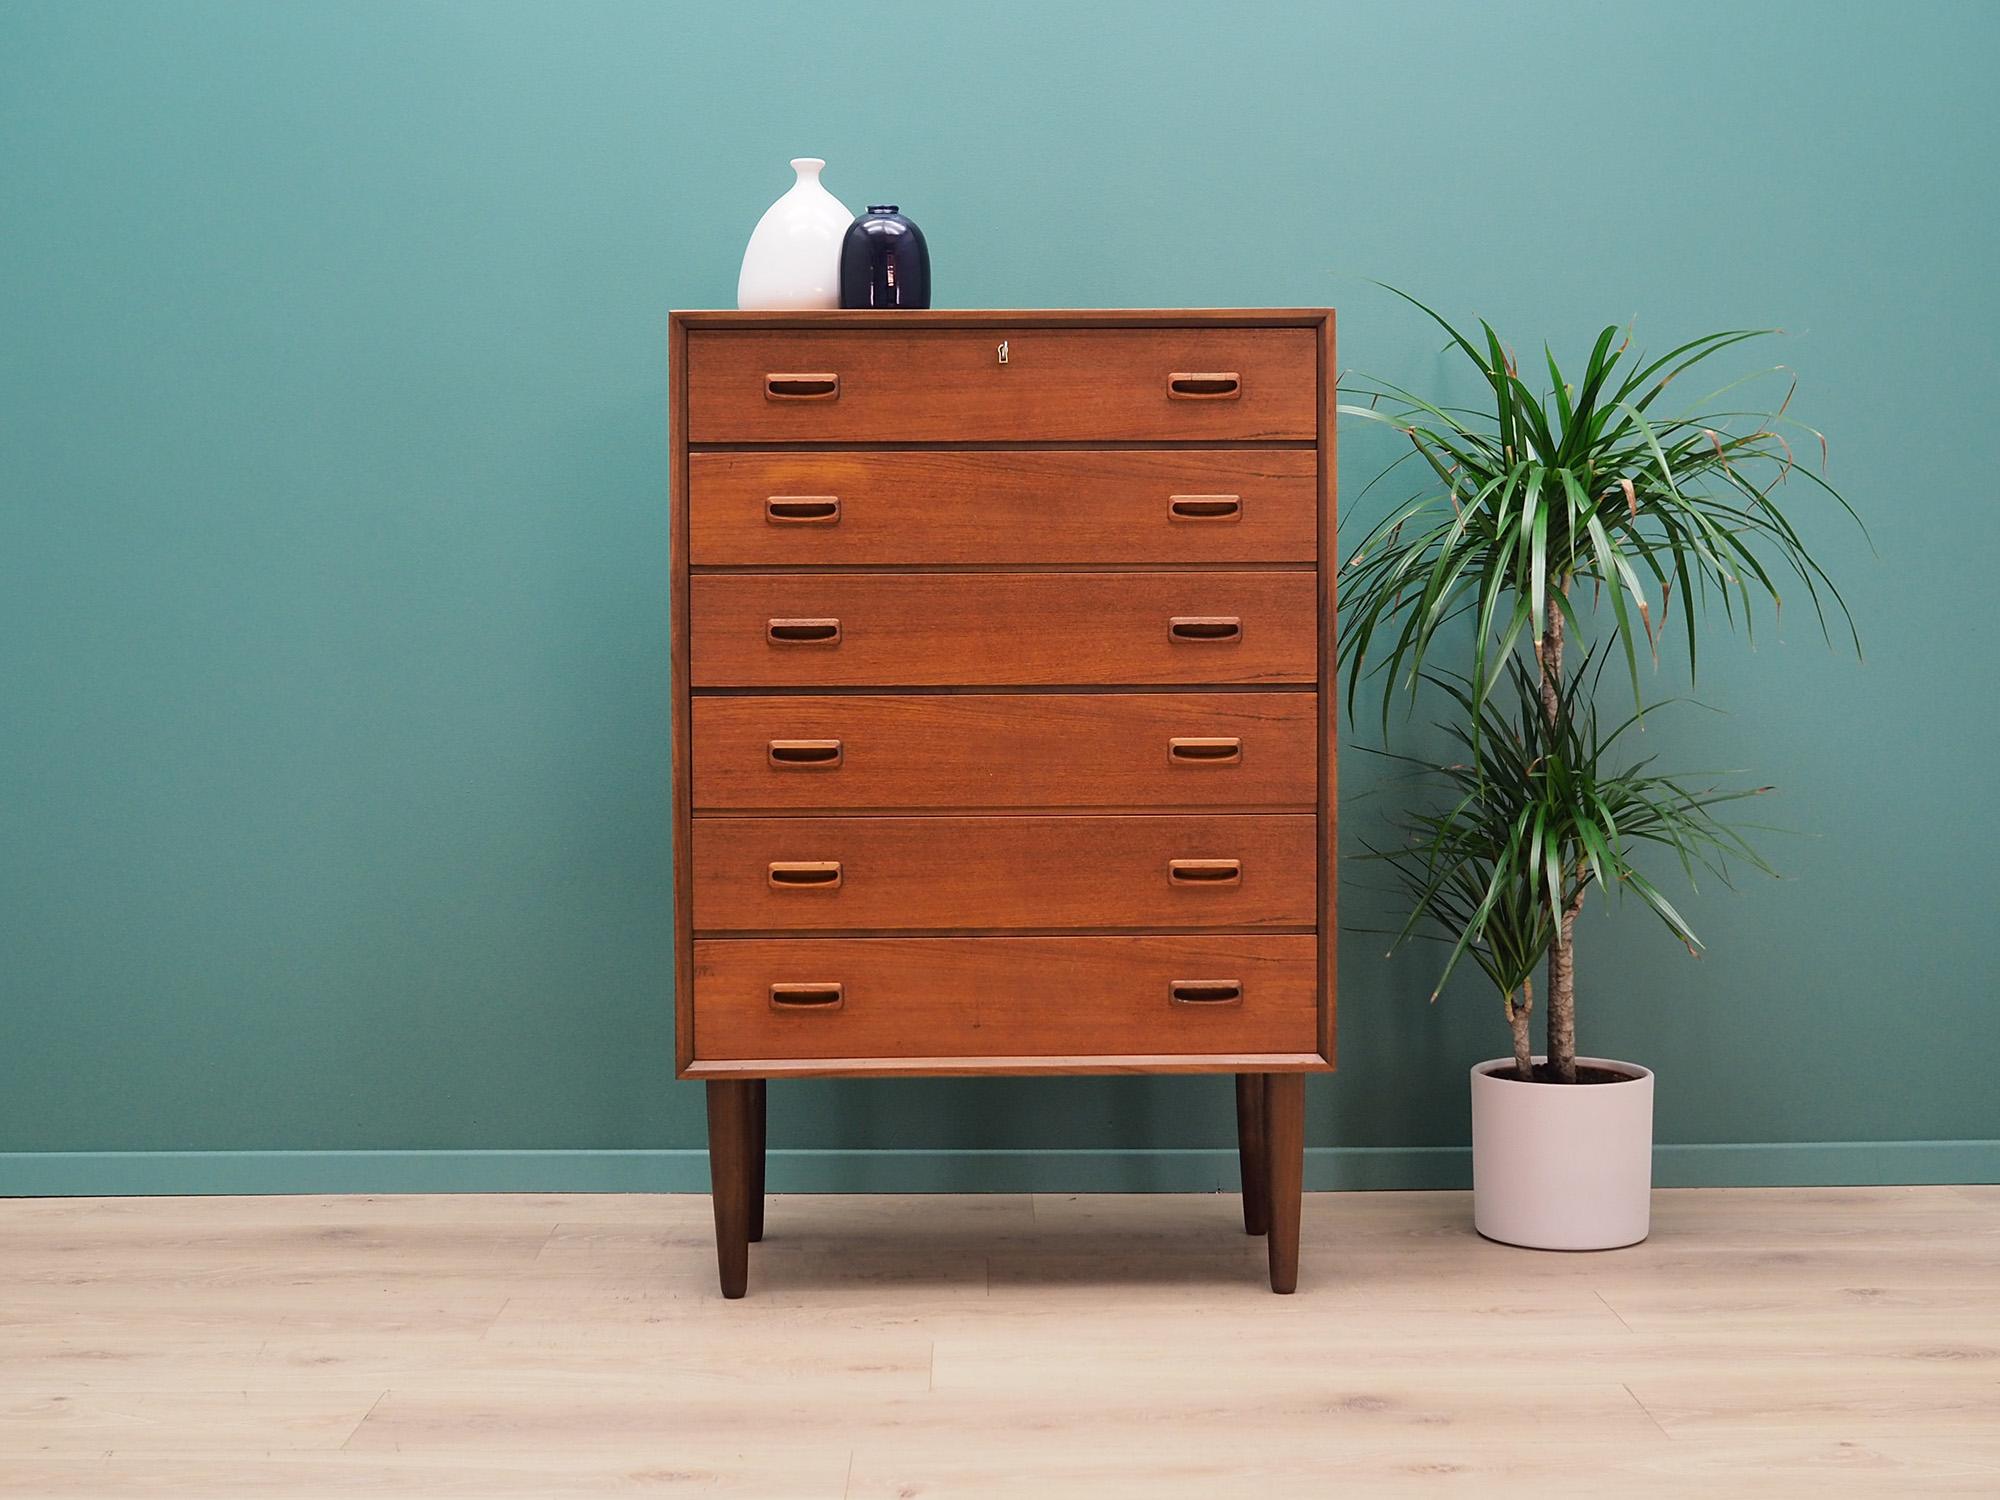 Exceptional chest of drawers from the 1960s-1970s. Minimalist form, Scandinavian design. Surface of the furniture is covered with teak veneer, legs are made of solid teak wood. Furniture has six spacious drawers, to which a key is attached.